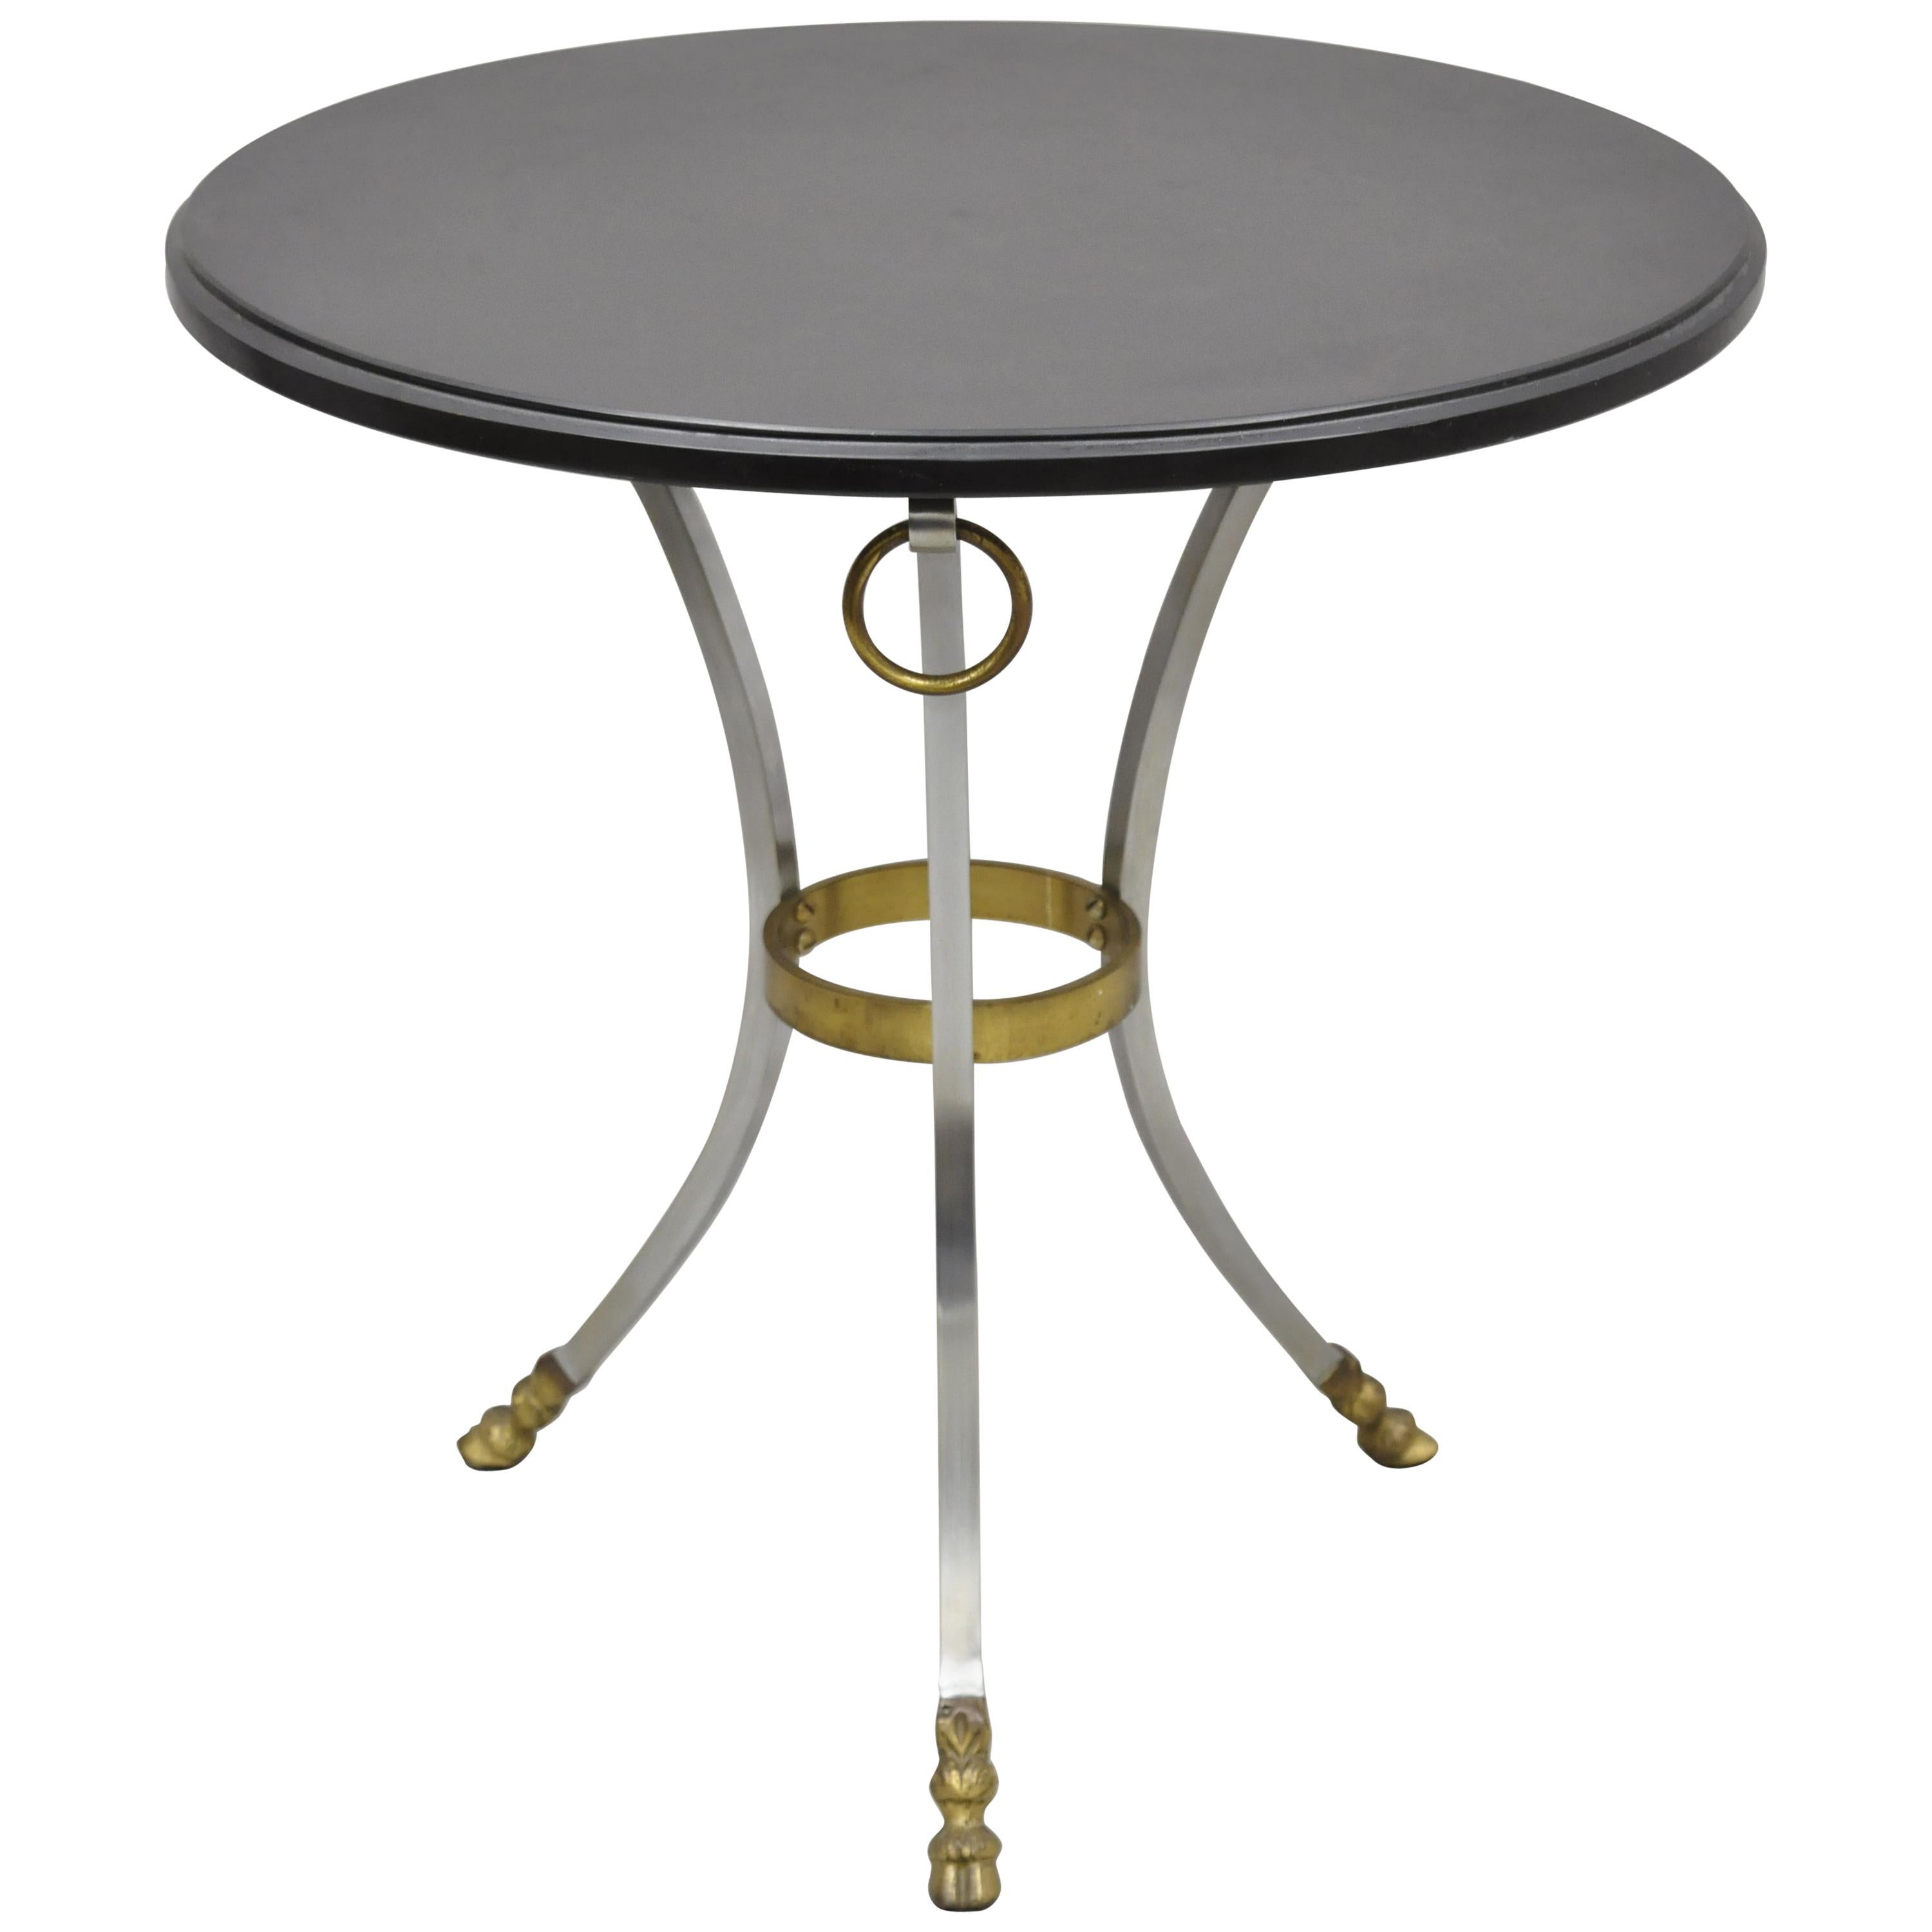 Maison Jansen Style Steel and Bronze Round Slate Top Hoof Feet Lamp Table For Sale